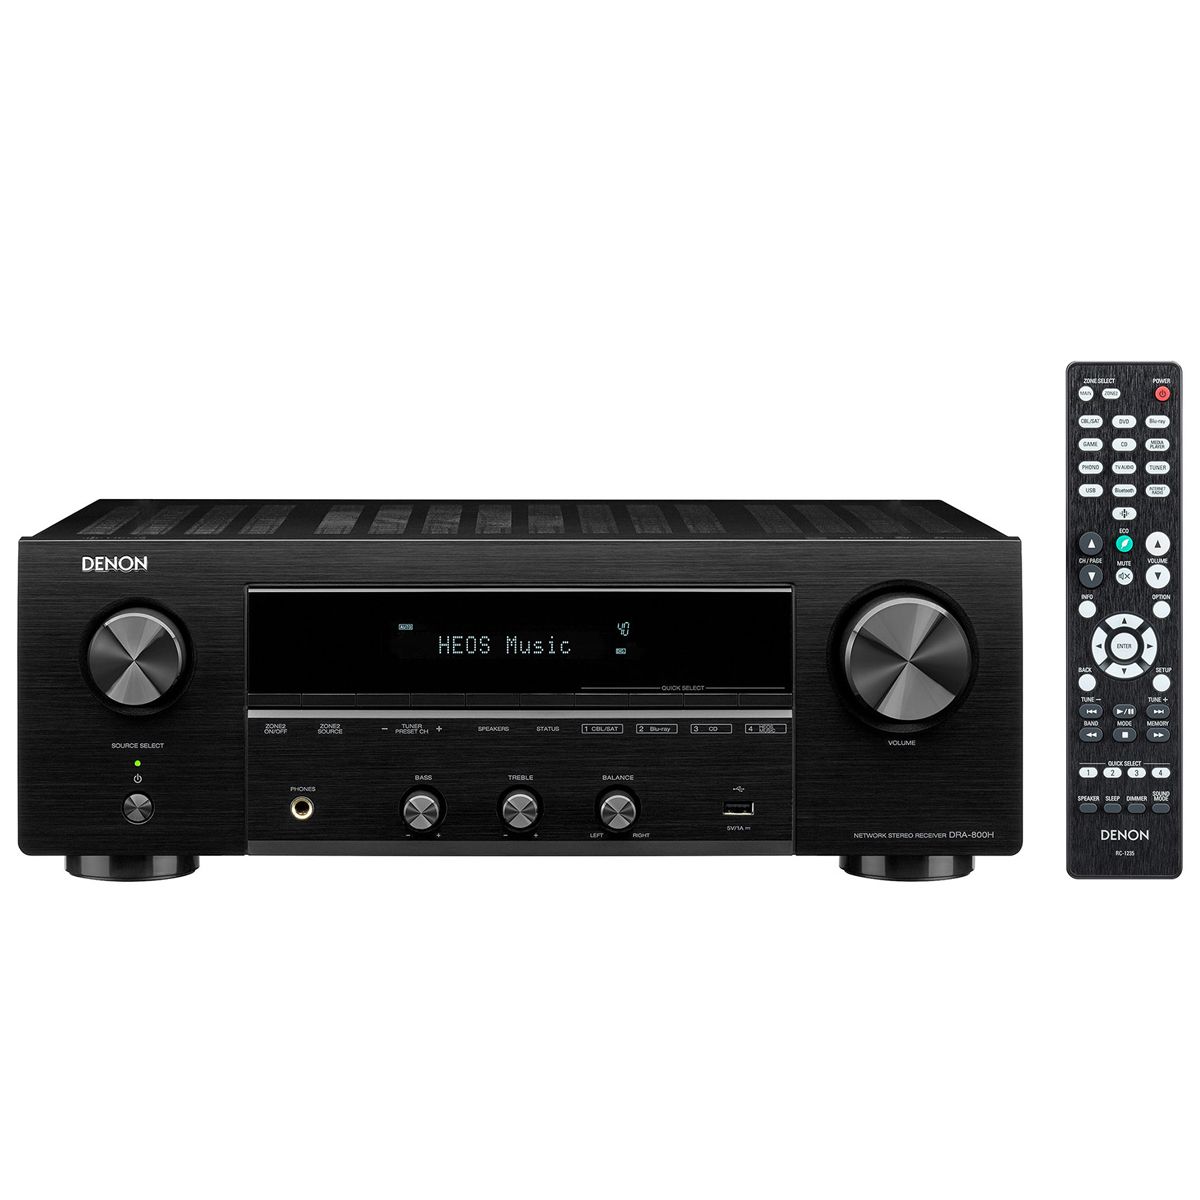 Denon DRA-800H Stereo Network Receiver - front view featuring remote